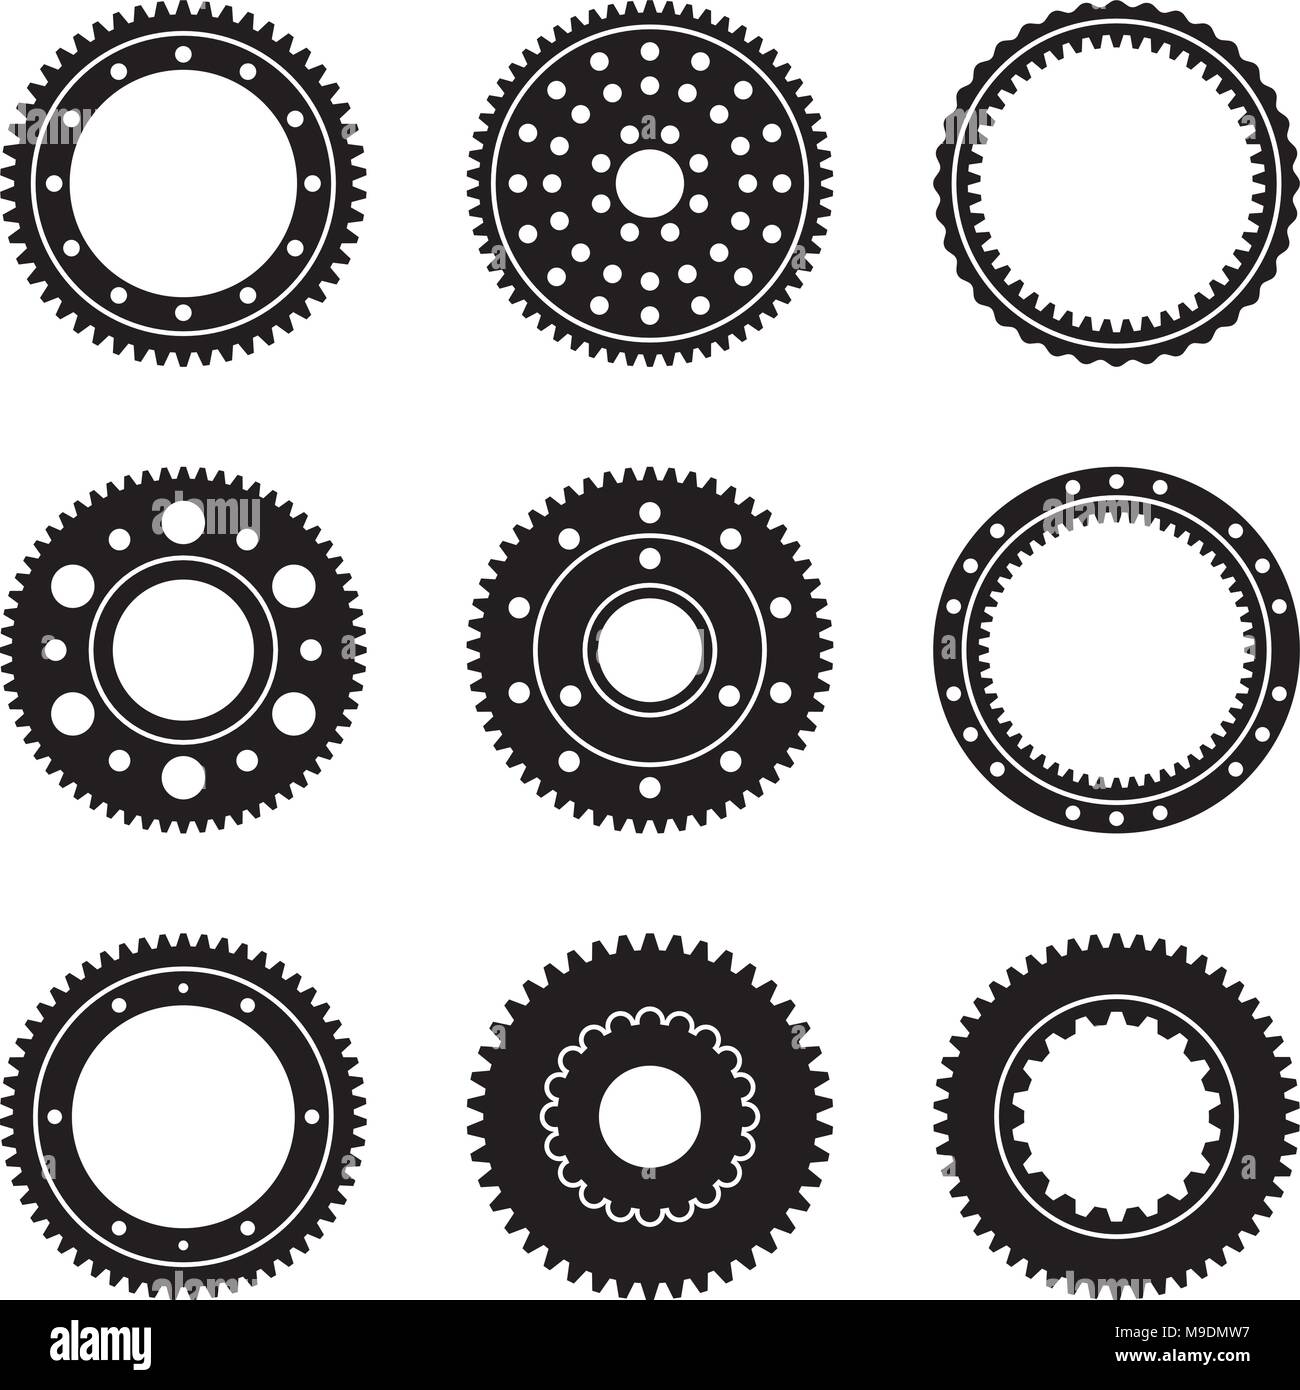 Set of different sizes of gear wheels Stock Vector